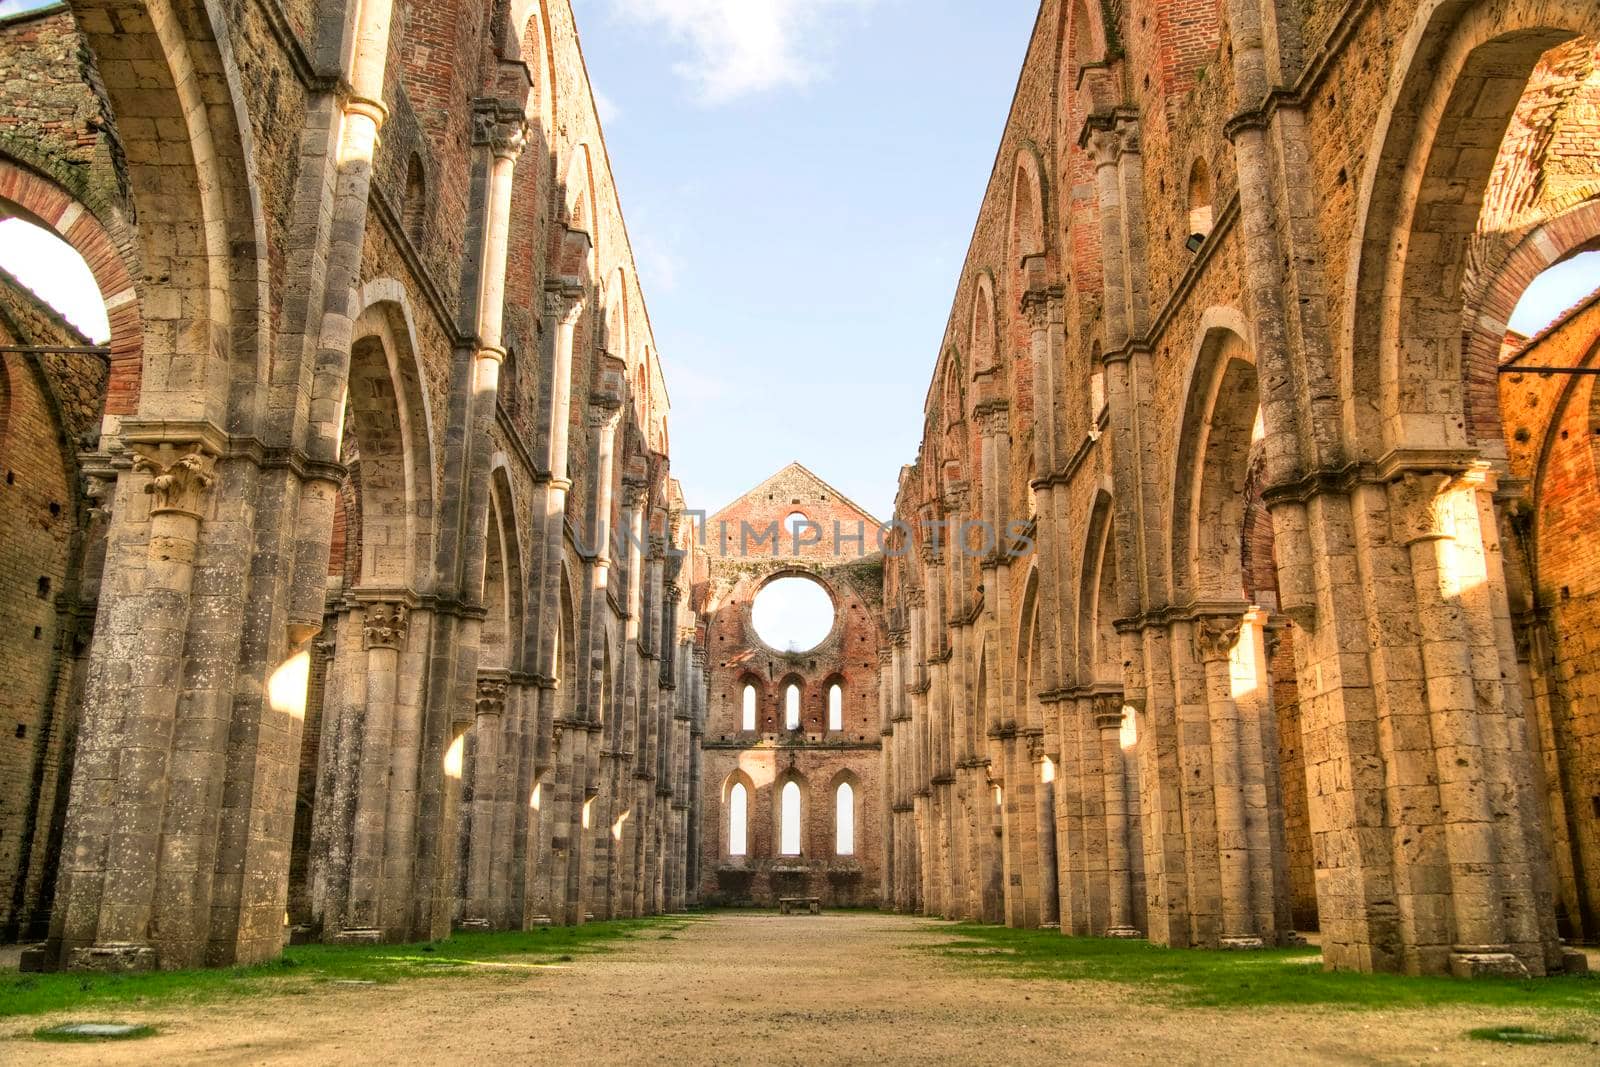 The famous roofless church in San Galgano Tuscany Italy  by fotografiche.eu